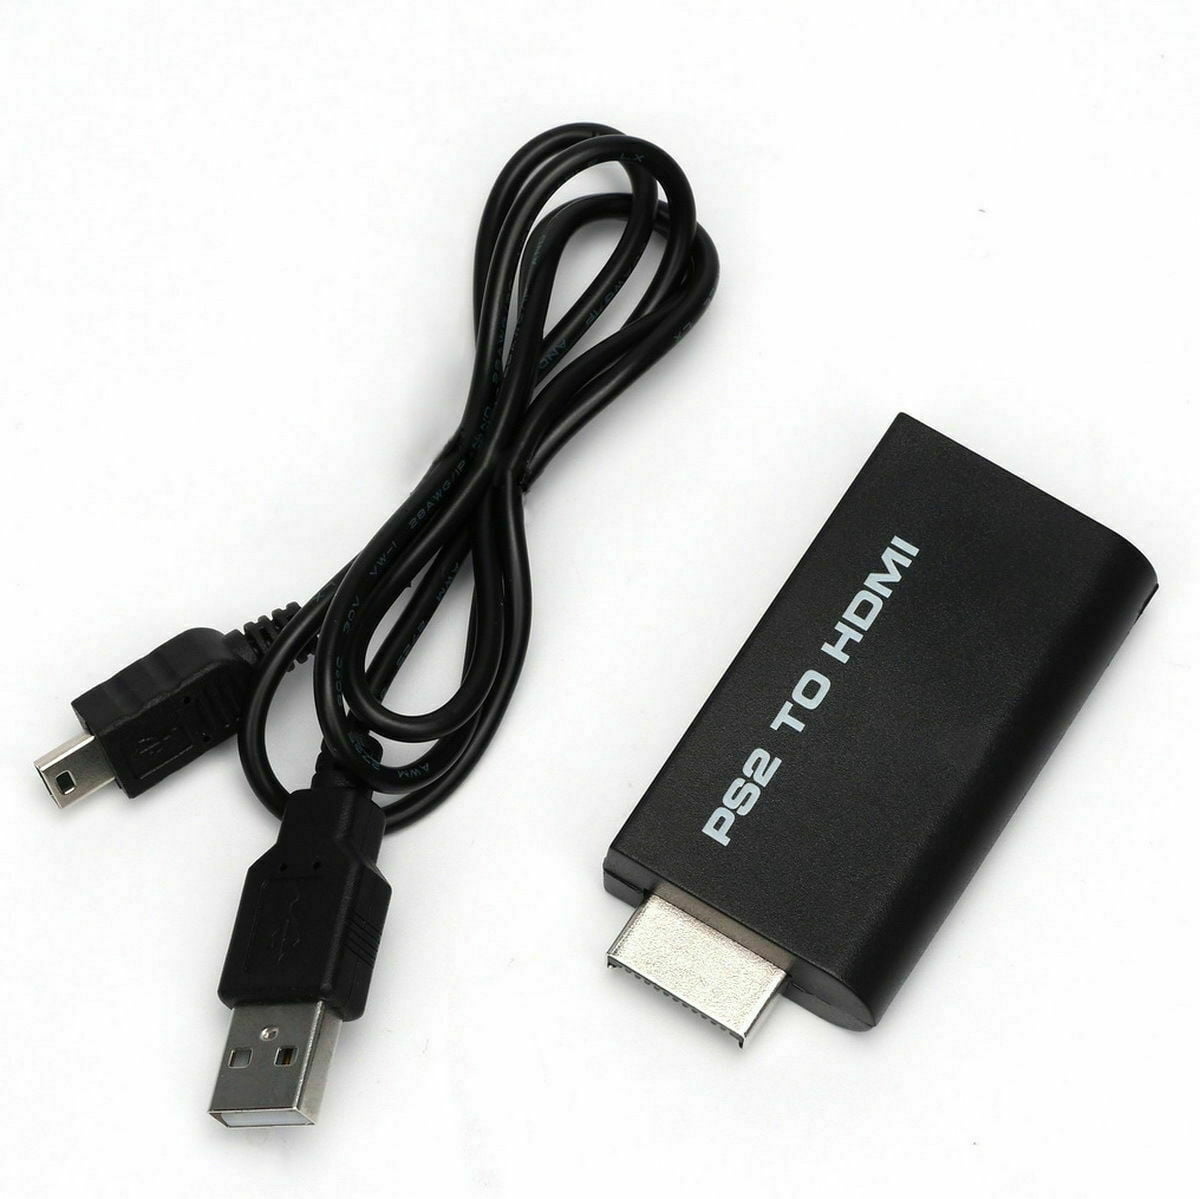 sony playstation 2 hdmi cable